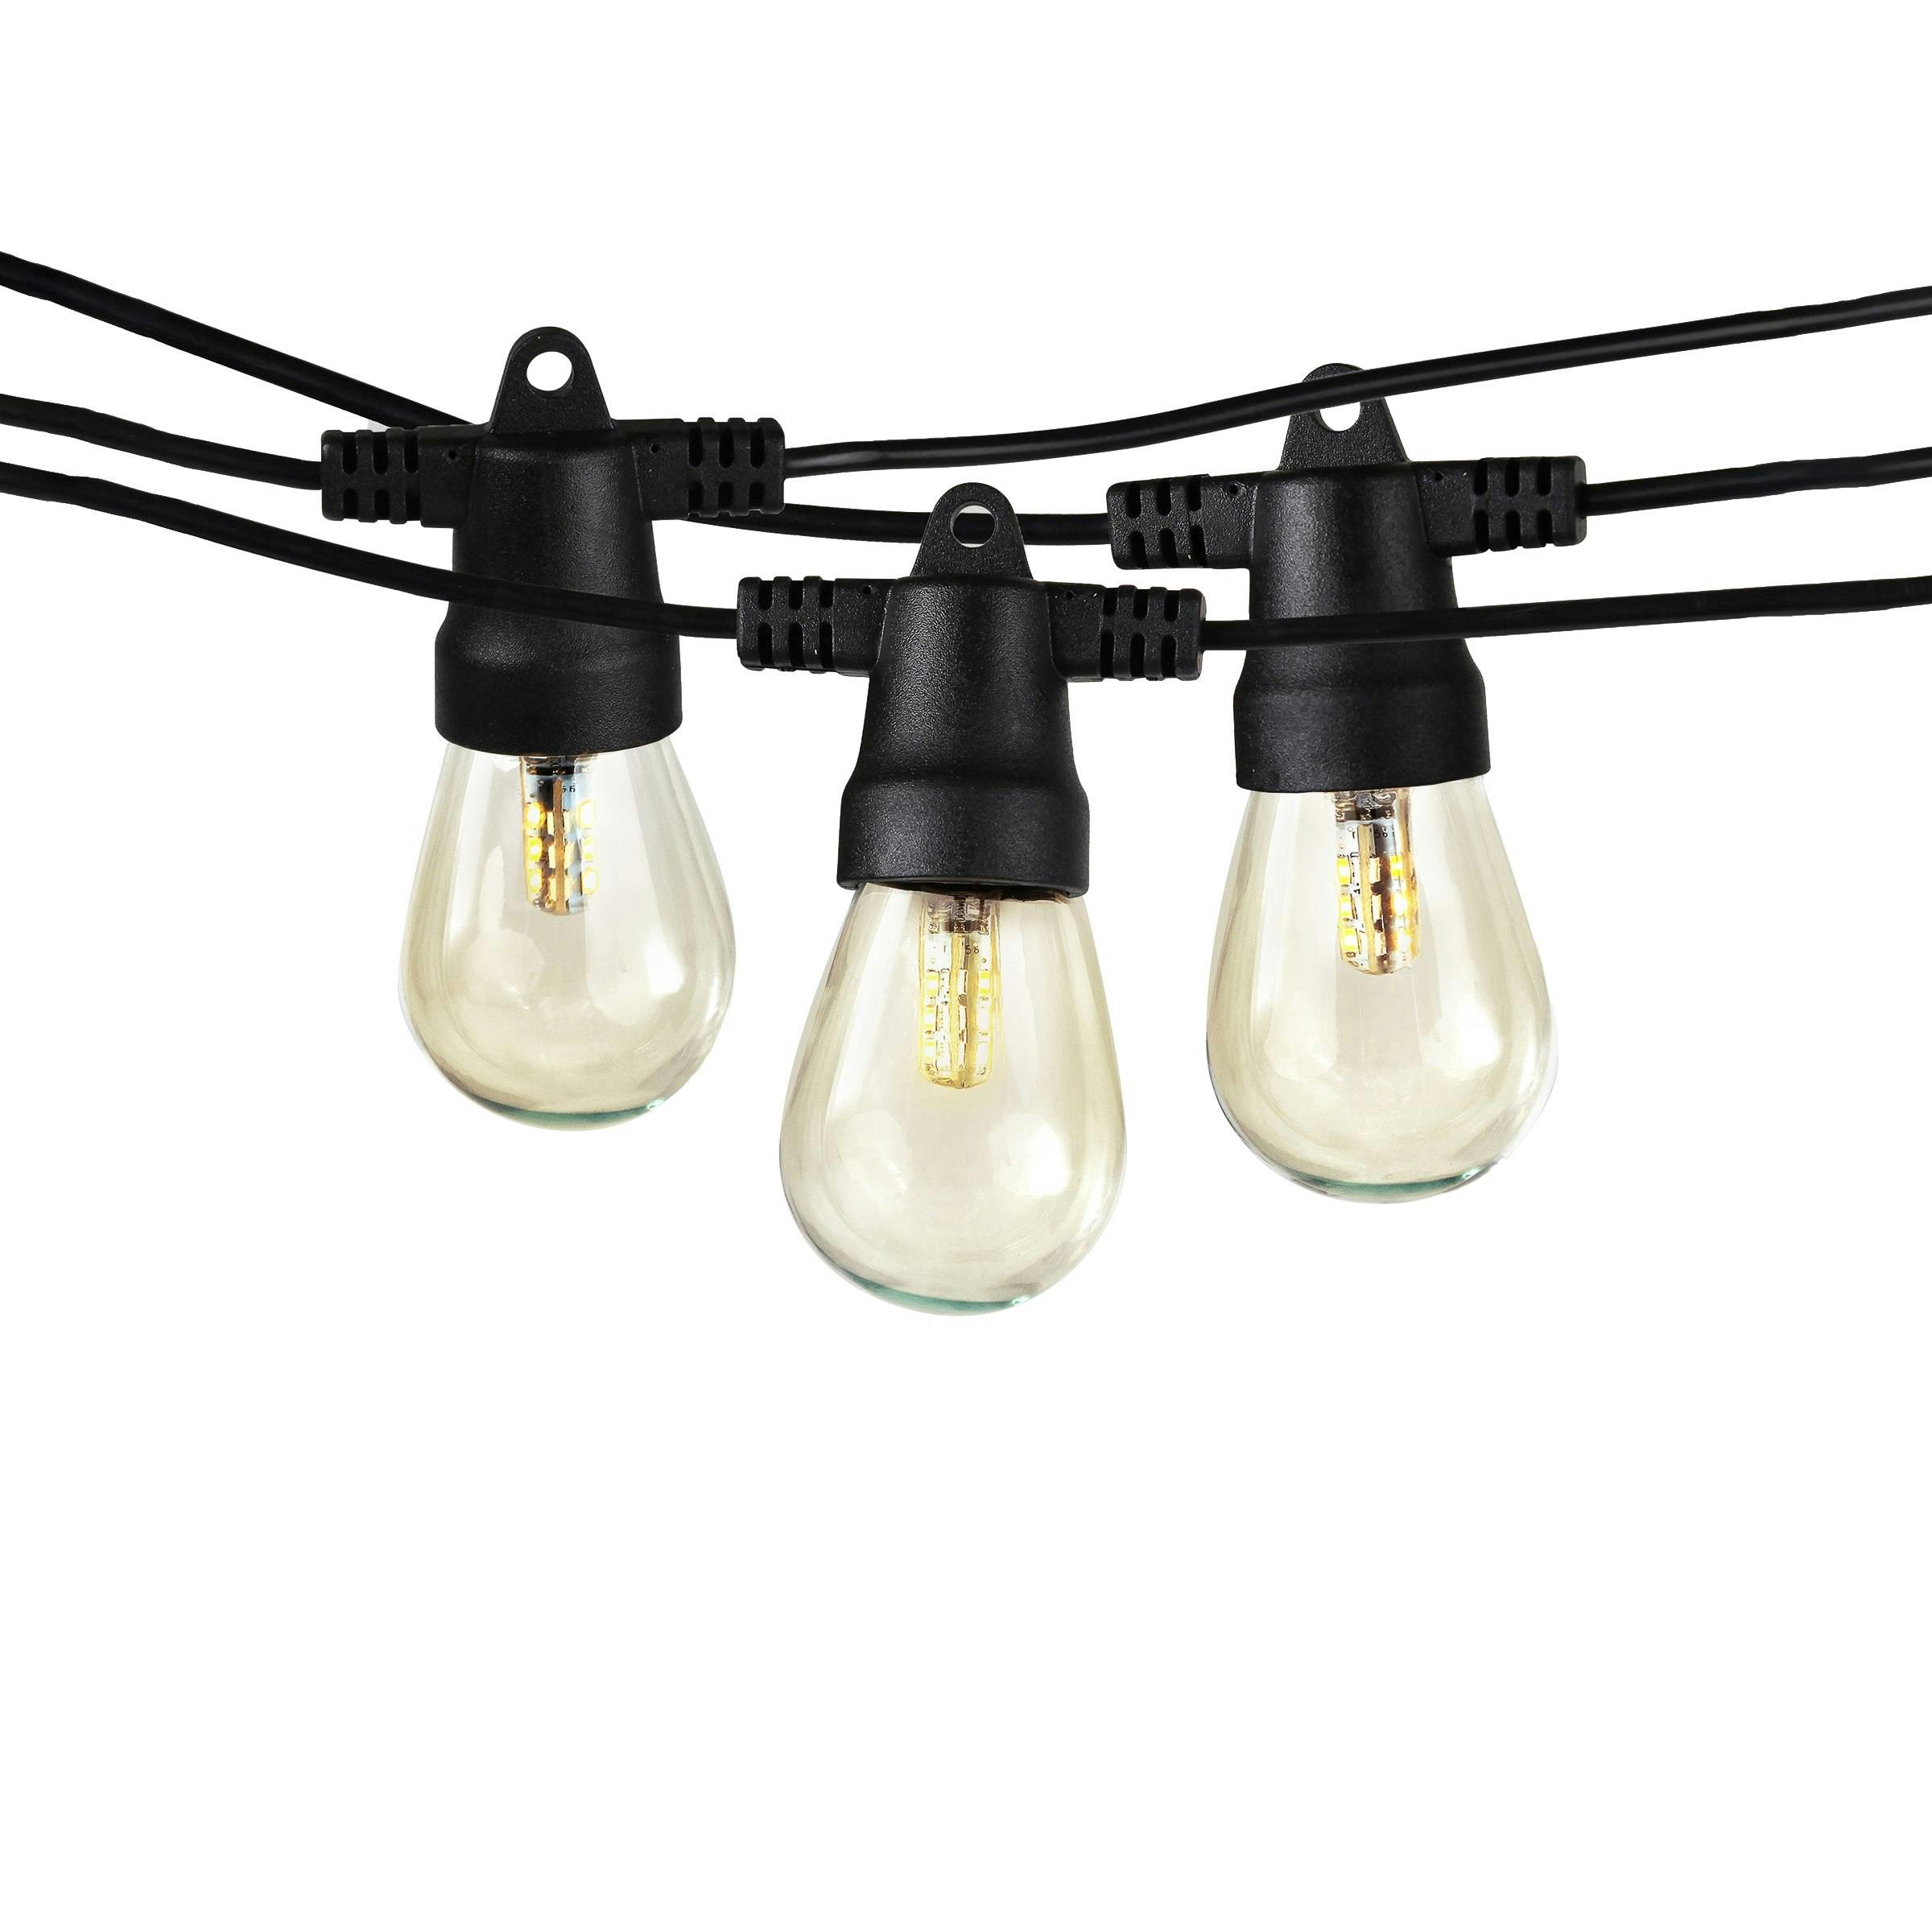 Ambience Pro Solar - Non Hanging String Lights